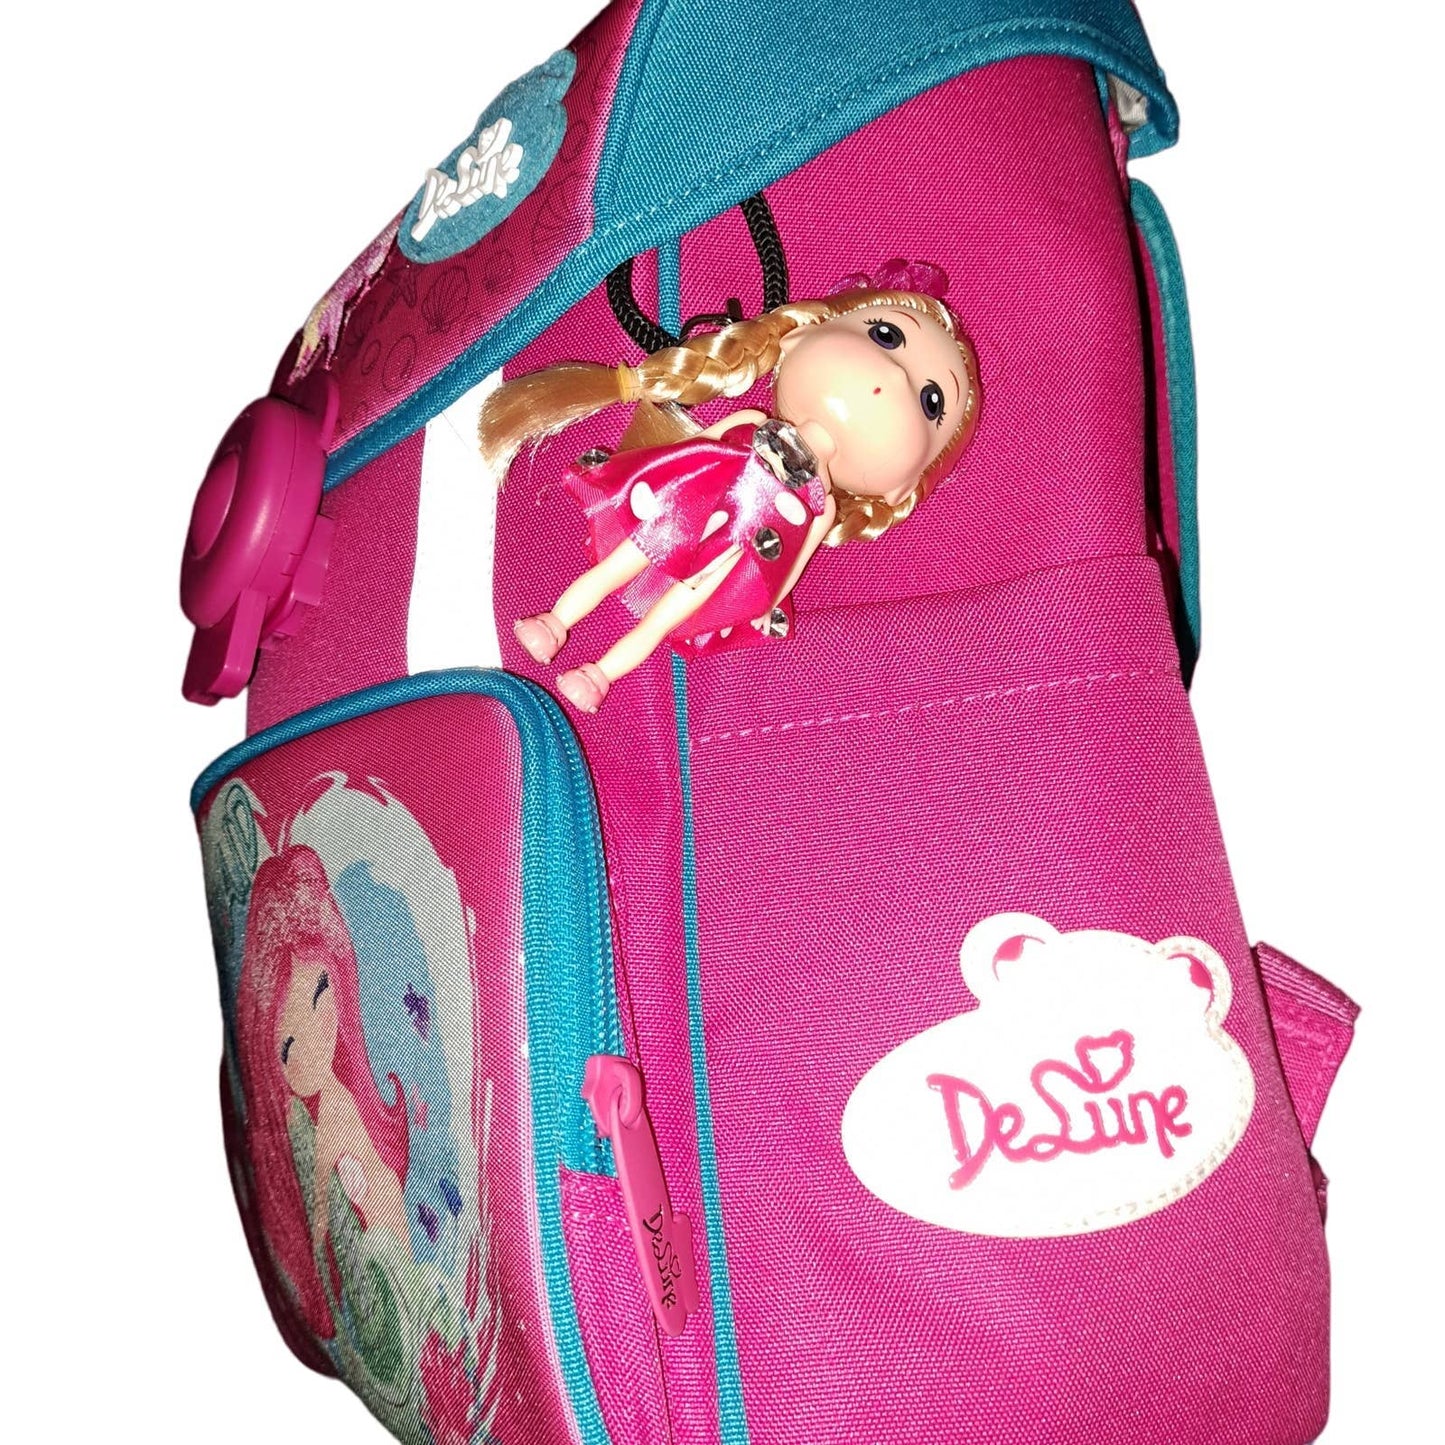 New Delune mermaid backpack spine protect